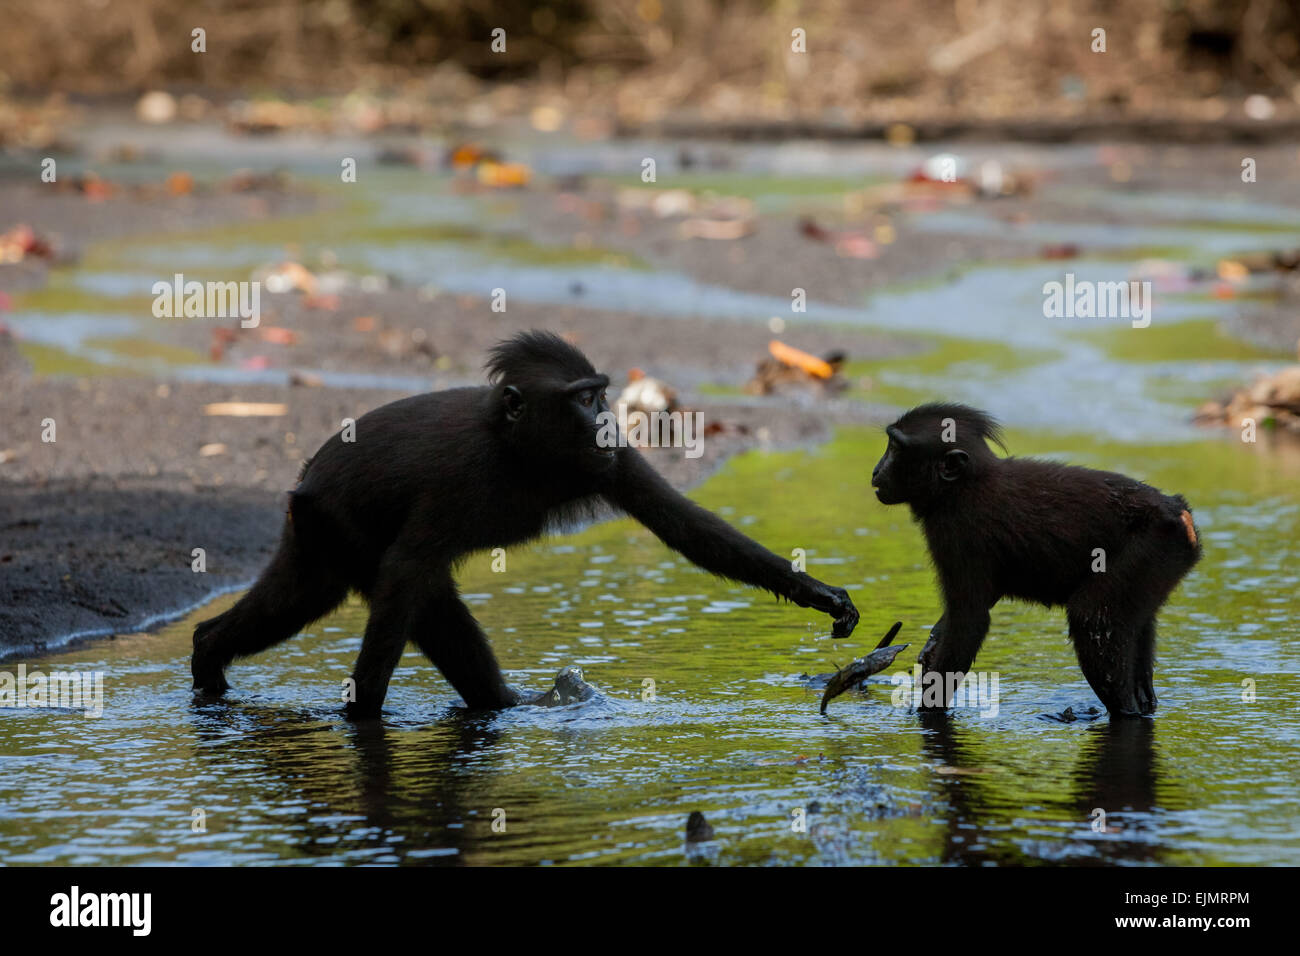 Sulawesi black-crested macaques (Macaca nigra) play at a stream close to a beach in Tangkoko Nature Reserve, North Sulawesi, Indonesia. Stock Photo